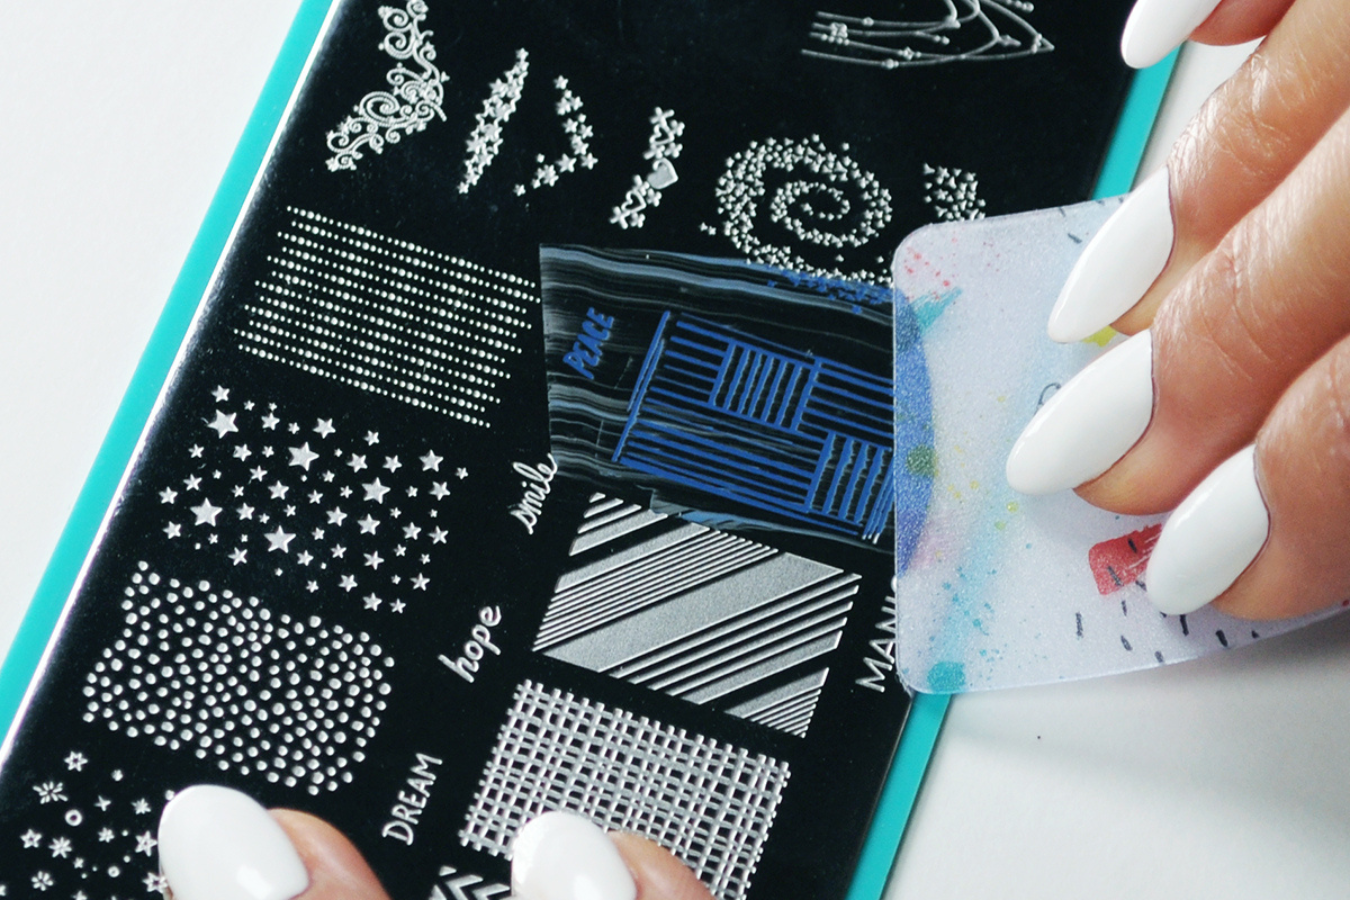 Nail Stamping Not Working (7 Common Mistakes You’re Doing When Stamping Your Nails)